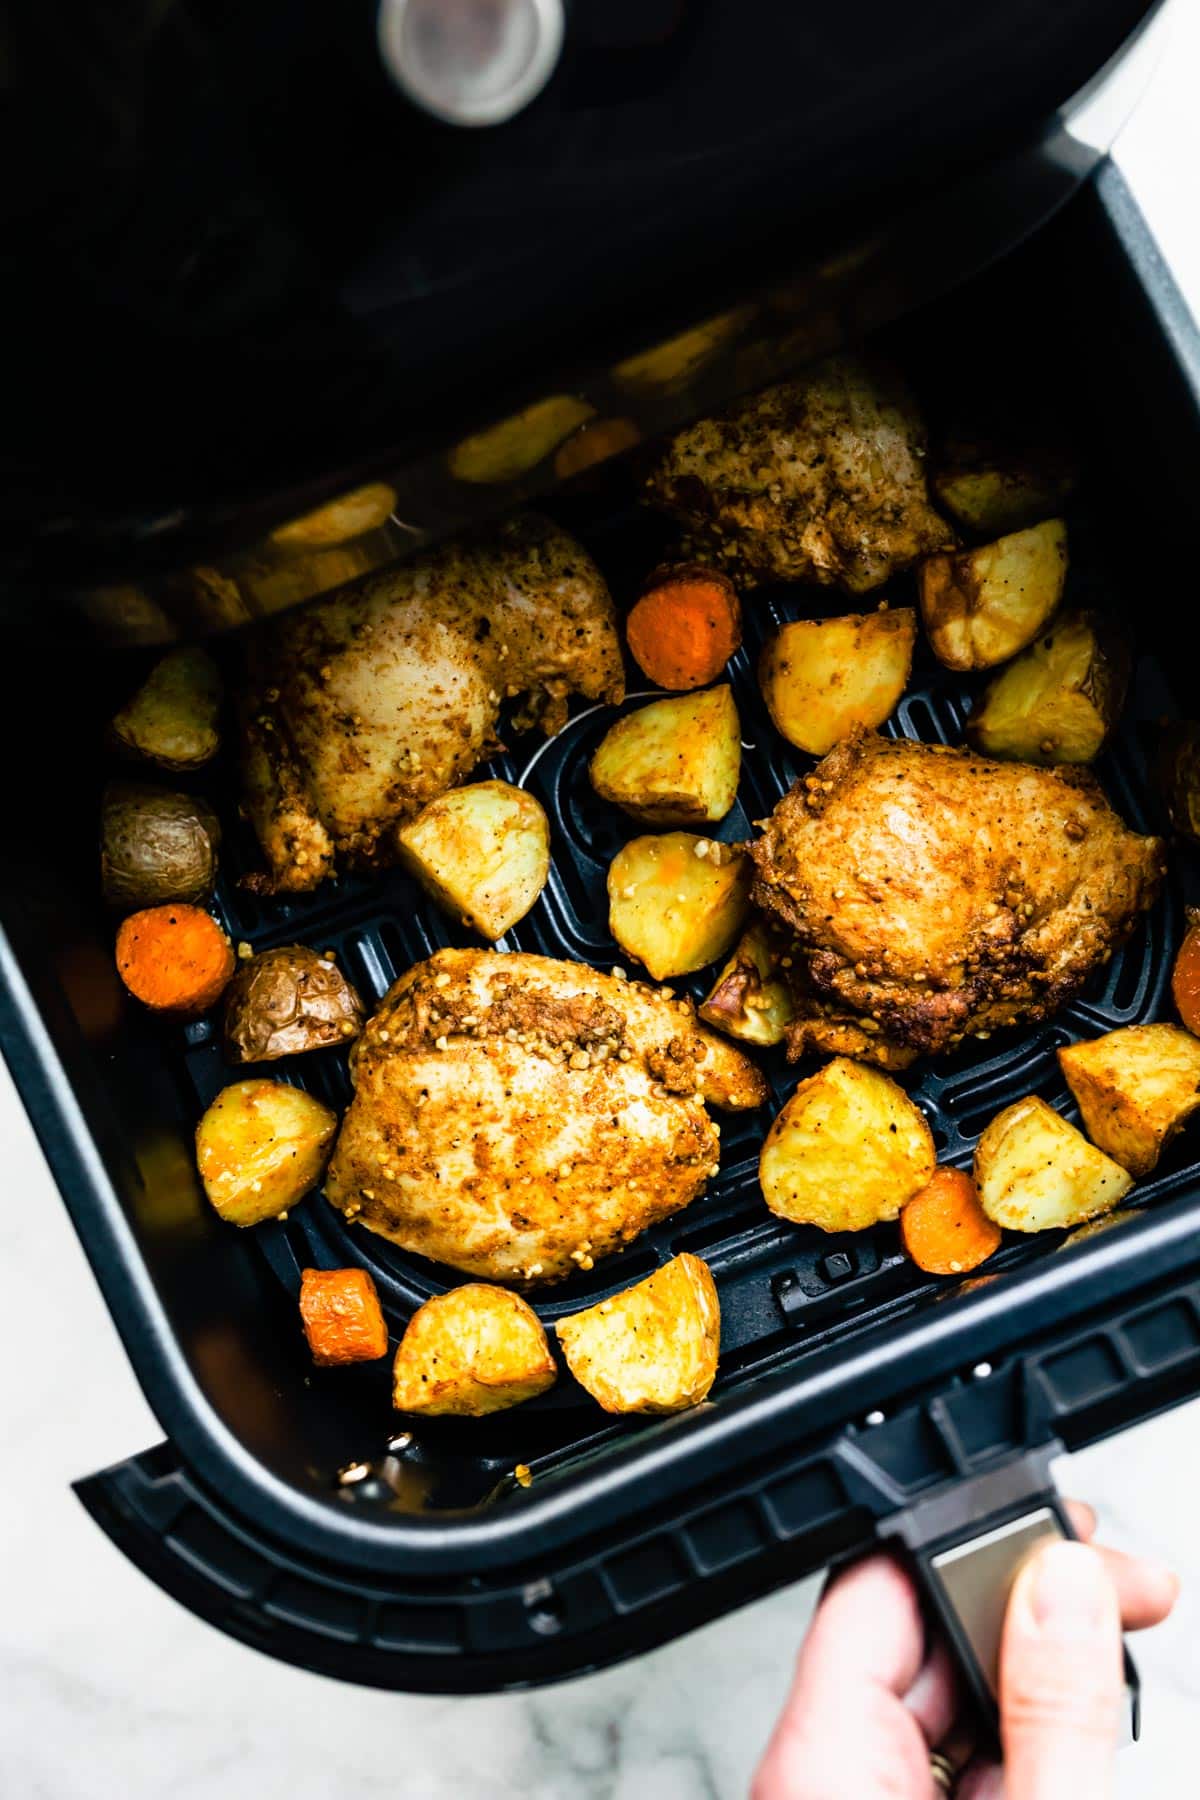 Overhead shot of an open air fryer with cooked Persian-Spiced Chicken and Potatoes.